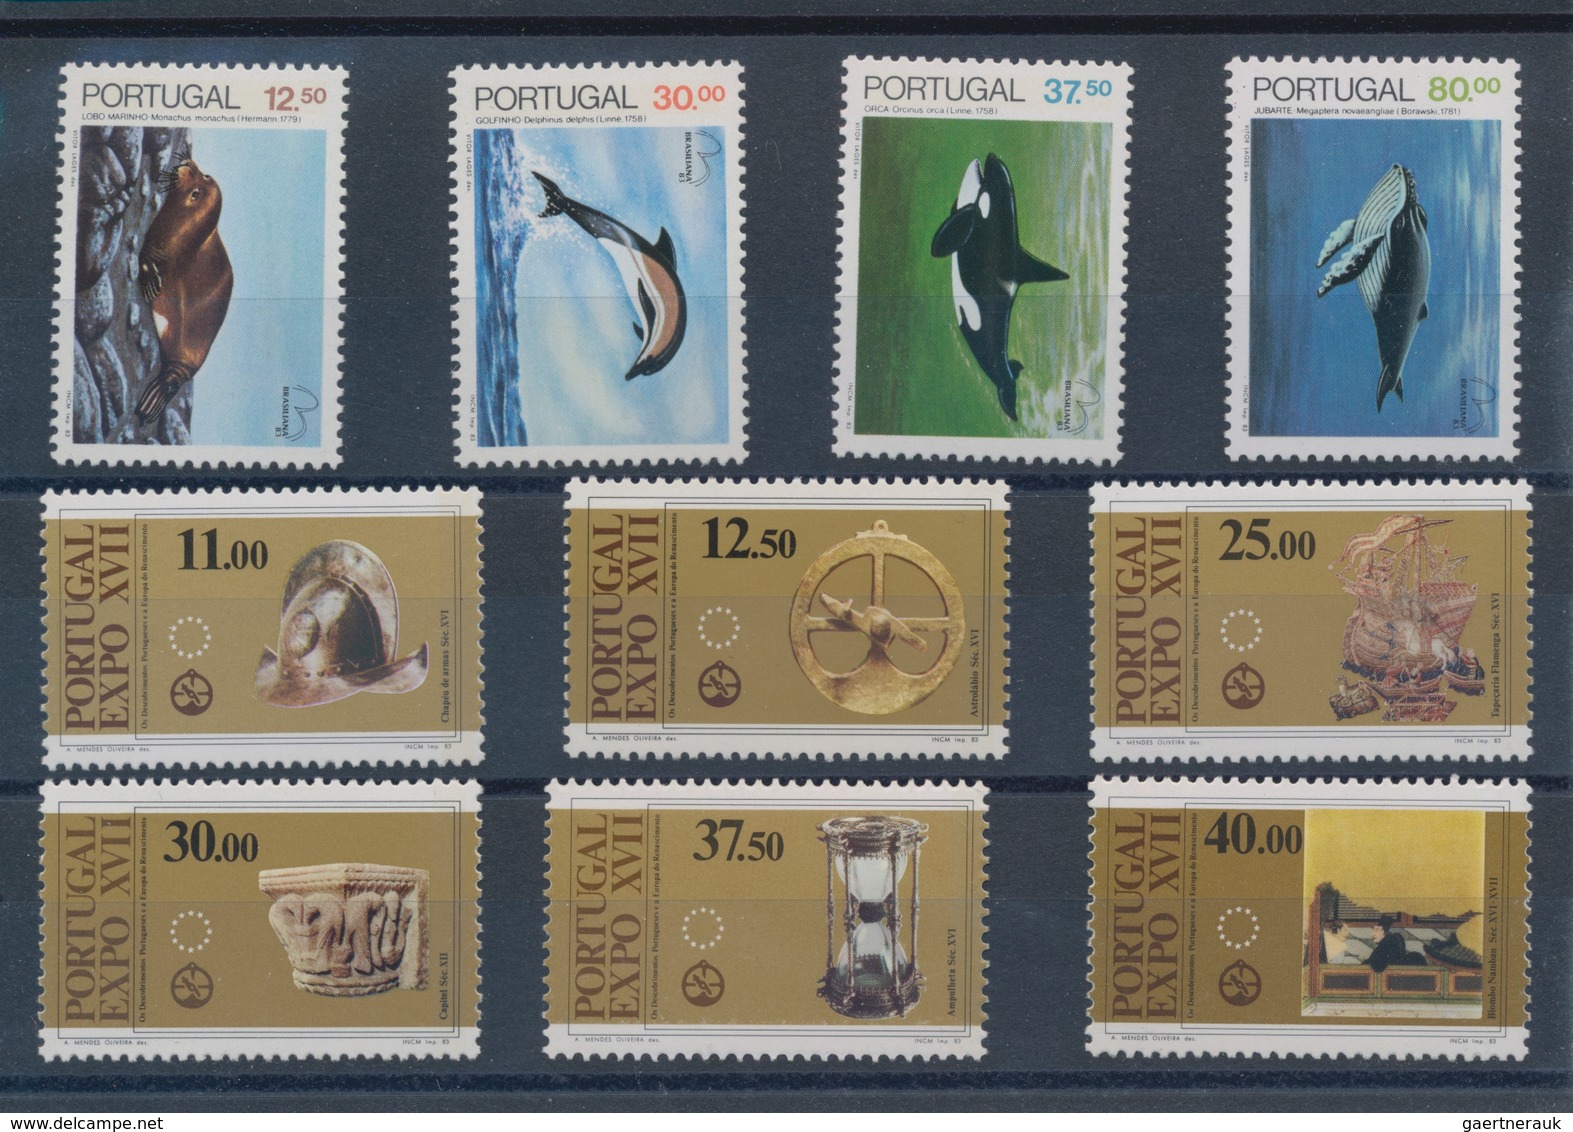 Portugal: 1982/1984, sets per 175 MNH without the definitives and souvenir sheets. Every year set is